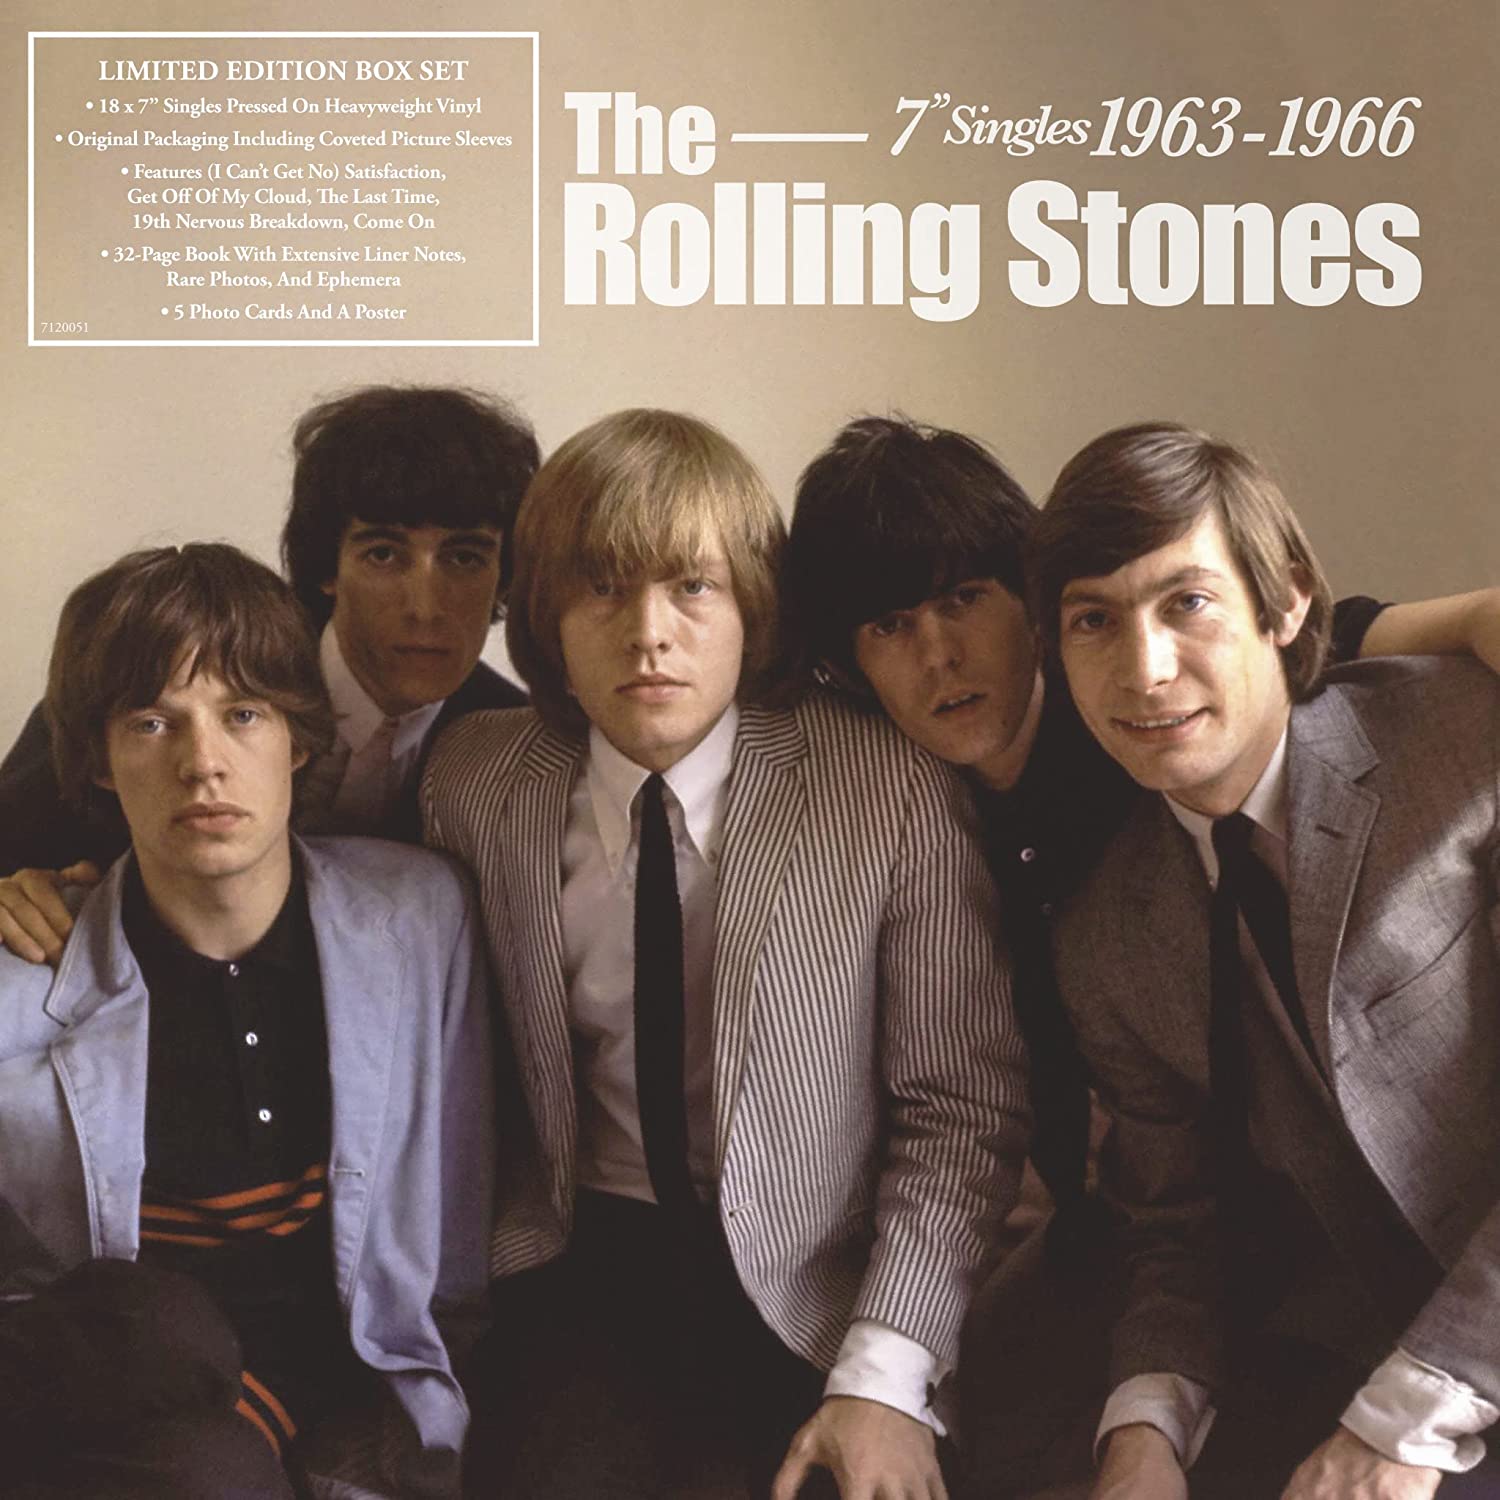 News – The Rolling Stones Singles: Volume One 1963-1966 – Limited Edition Box Set